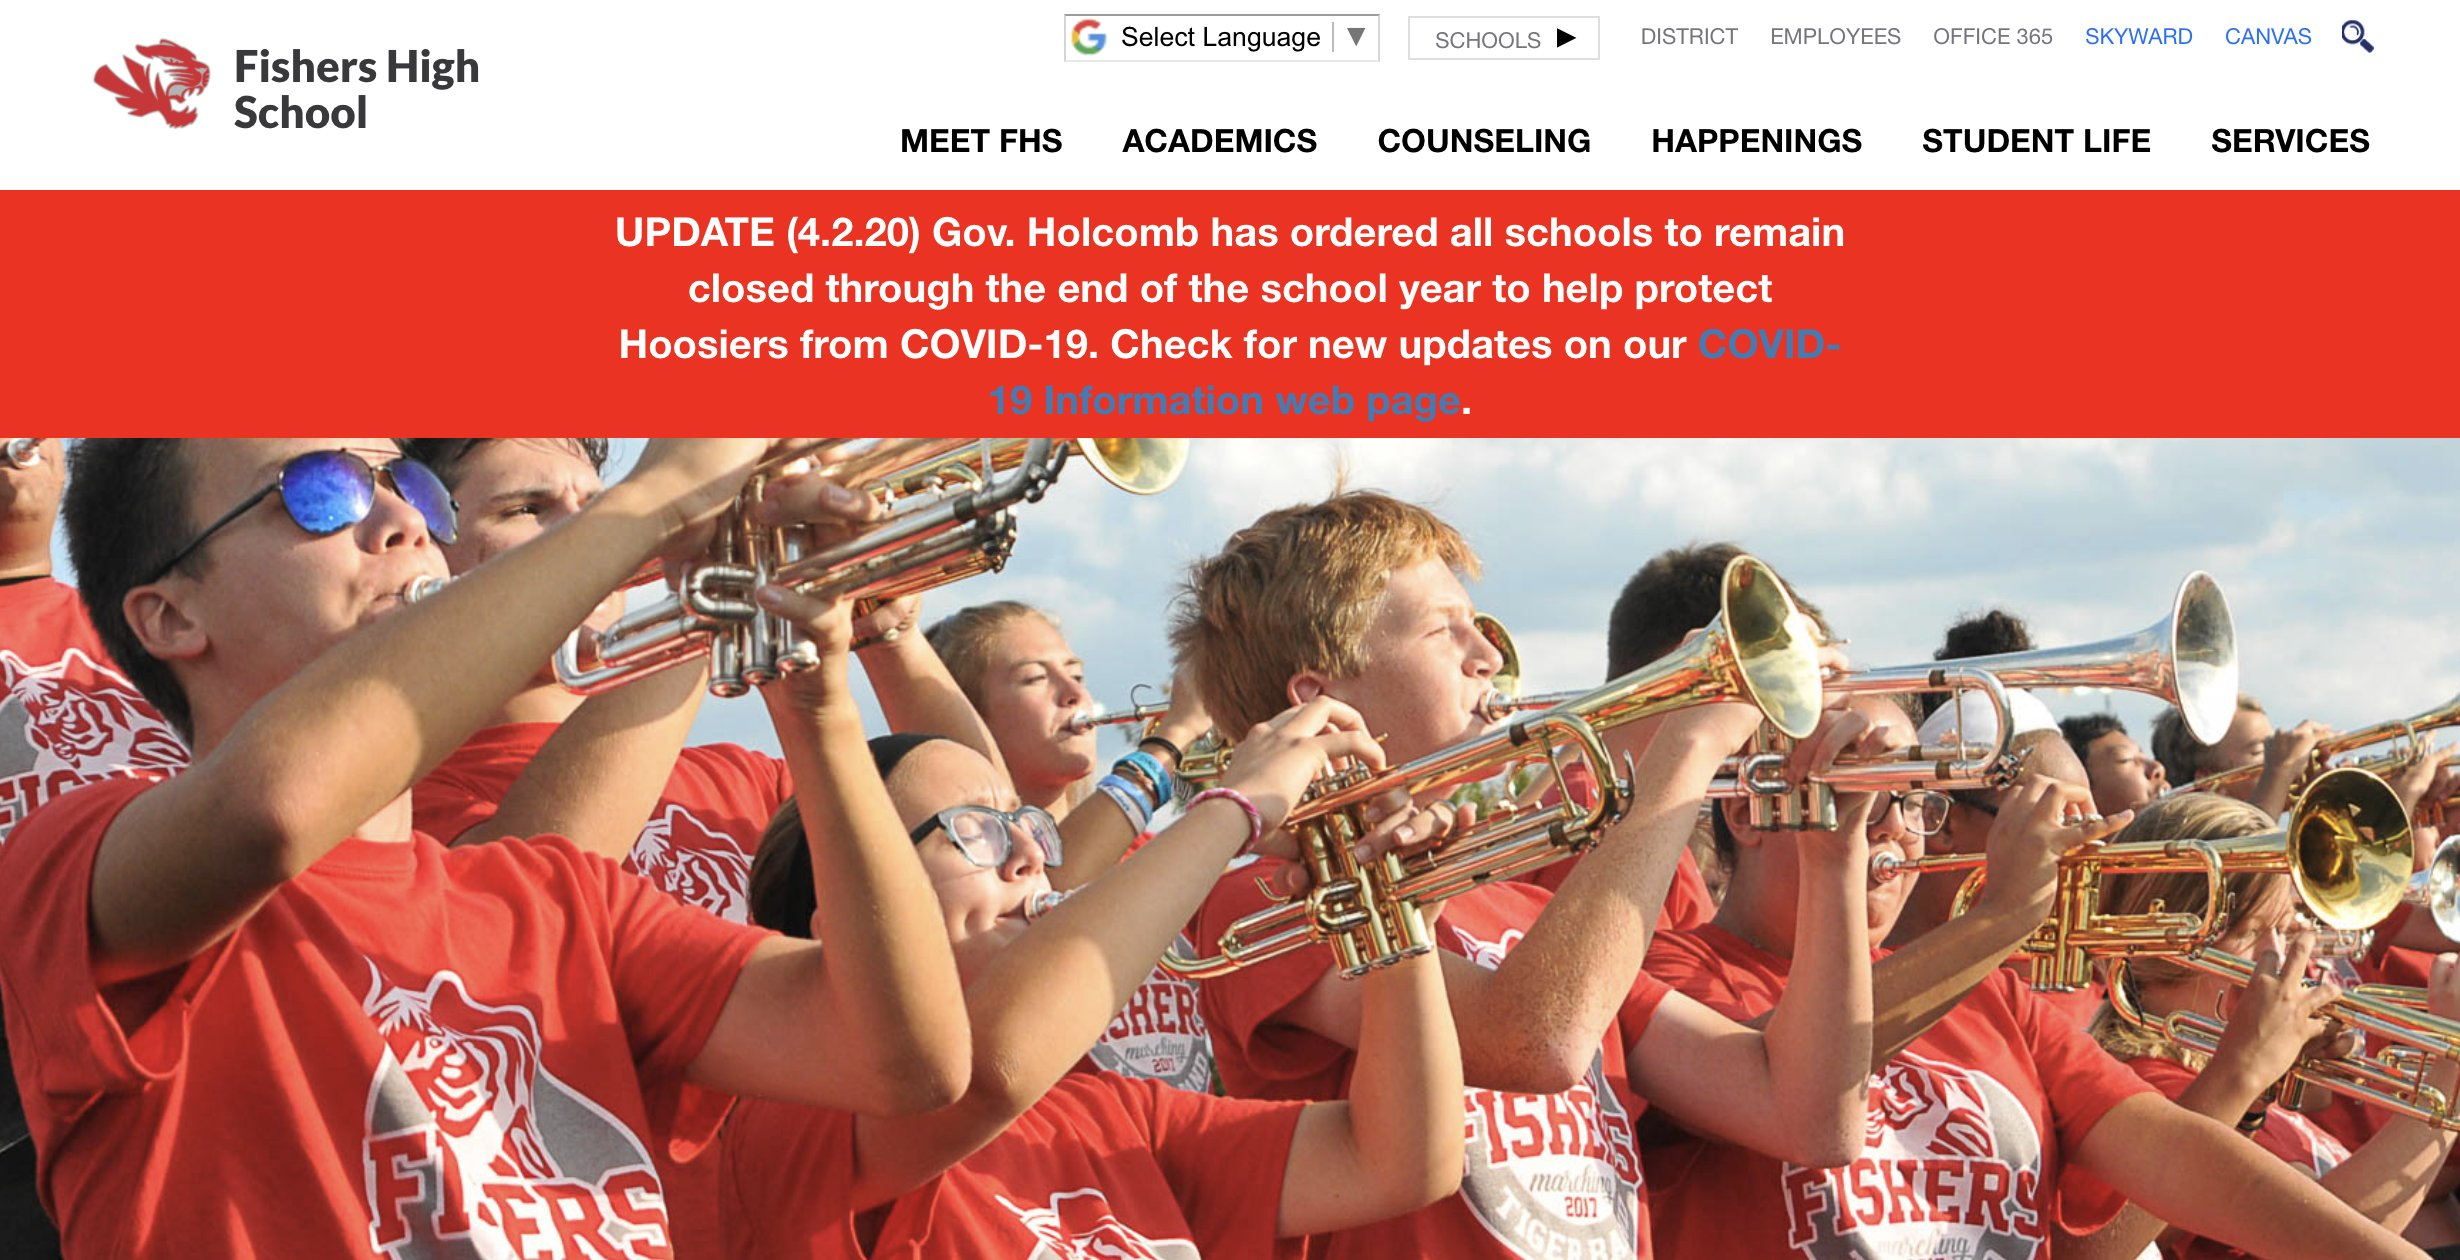 A narrow, bright red banner stacked on top of a full-width photo of the trumpet section of a high school band. The banner reads, 'Update (4.2.20) Gov. Holcomb has ordered all schools to remain closed through the end of the school year to help protect Hoosiers from COVID-19. Check for new updates on our COVID 19 Information web page.' The phrase, 'COVID-19 Information page' is set to a light blue color to indicate it is a link, making it difficult to read when placed against the bright red background.